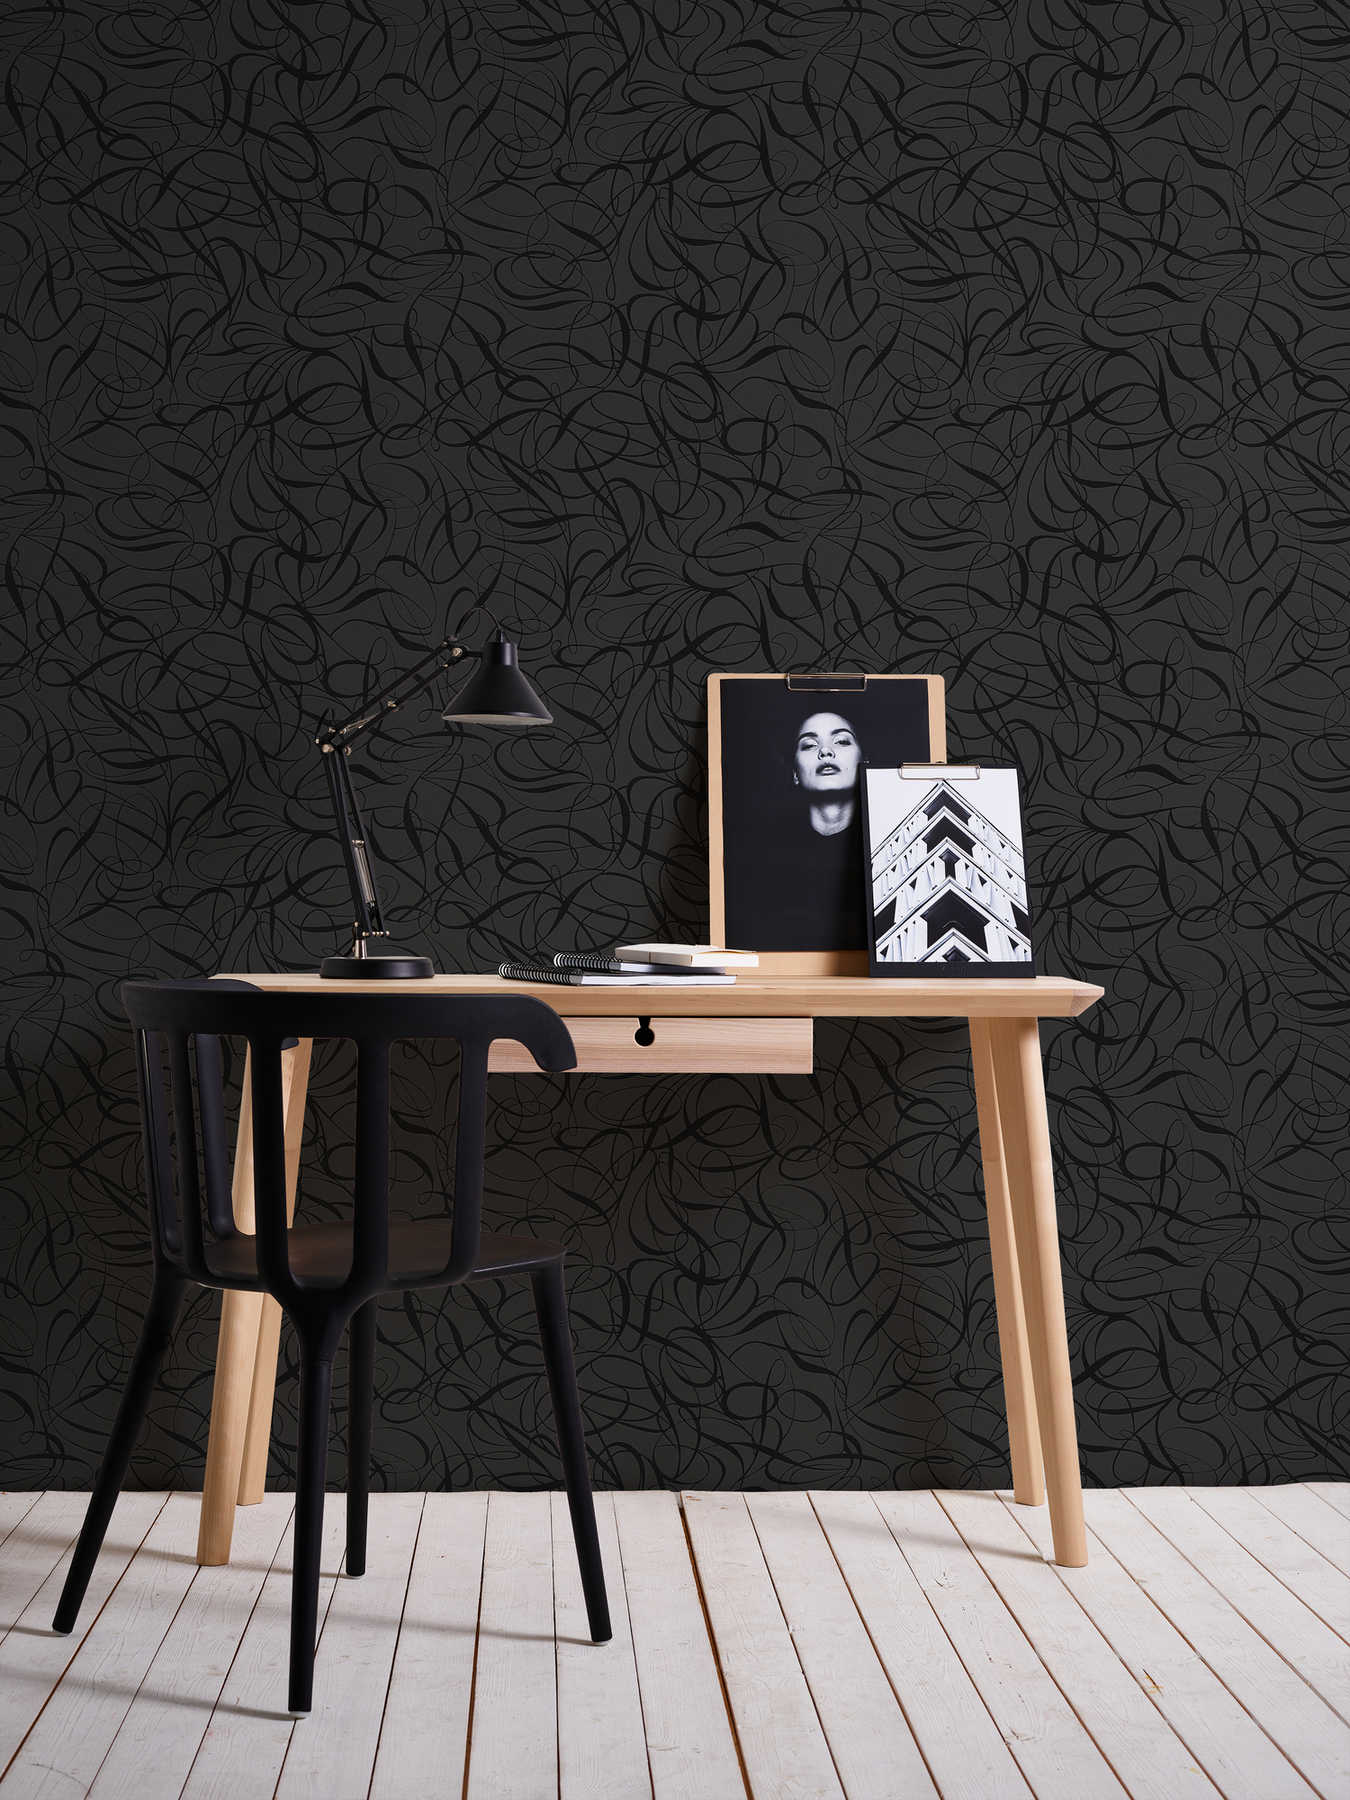             Non-woven wallpaper line pattern and glossy effect - black, metallic
        